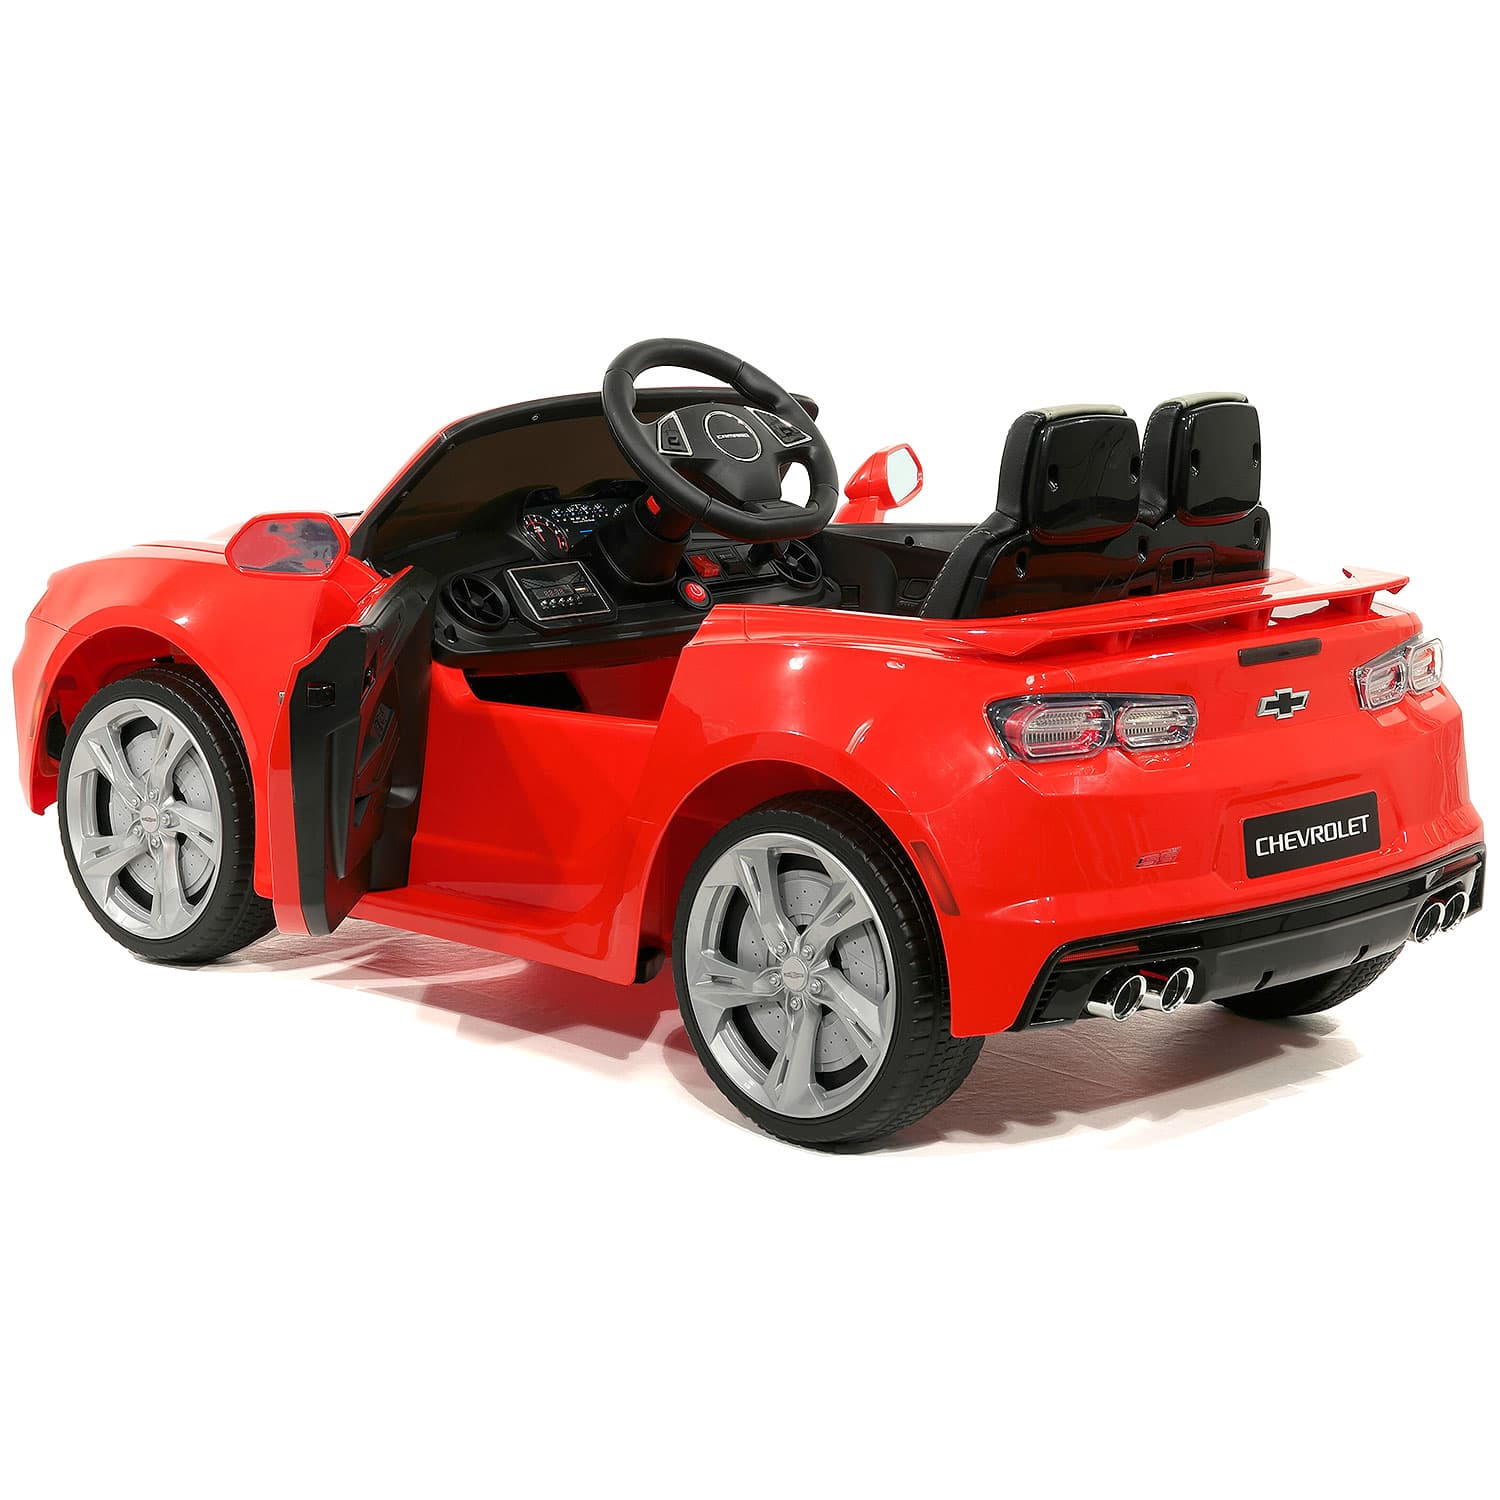 Chevrolet Camaro Ss 12v Kids Ride-on Car With Parental Remote Control | Red